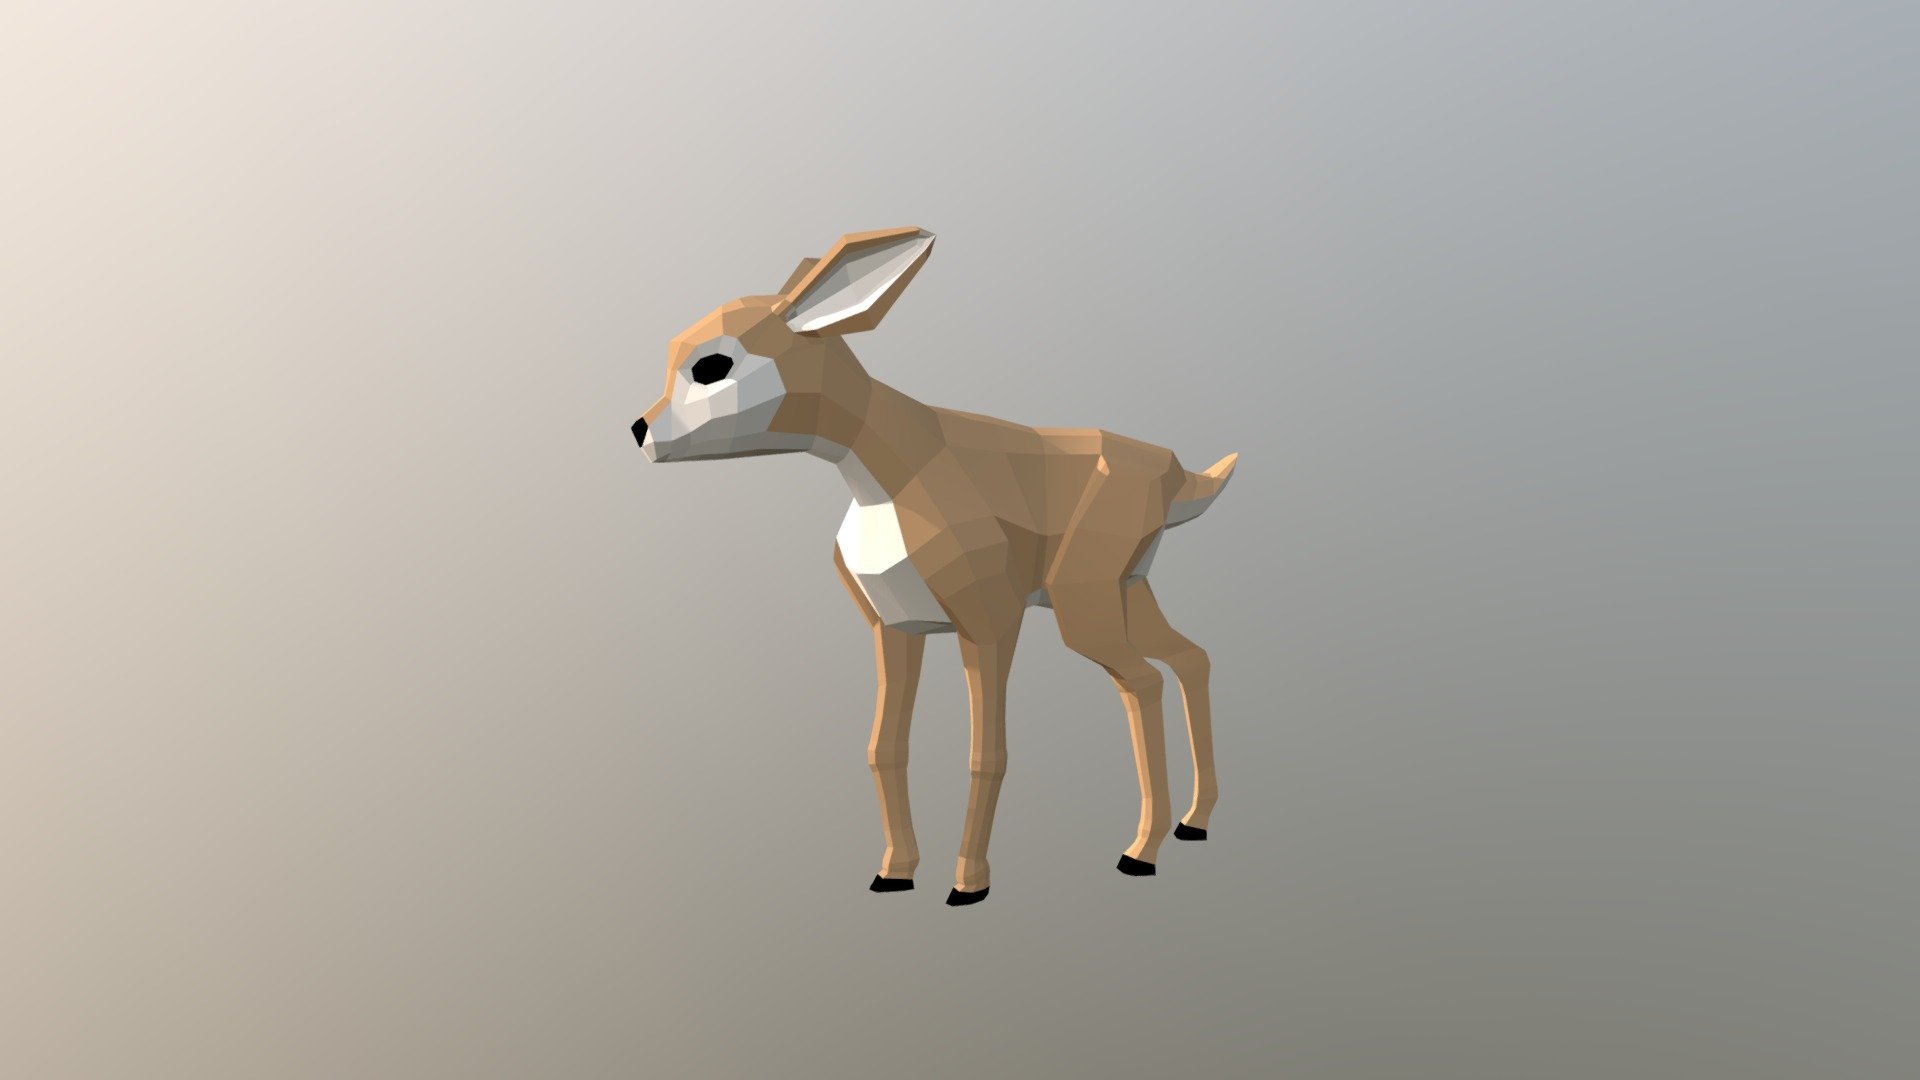 A feceted-Style fawn that is rigged and animated natively in Blender. No texture maps needed since this is made with just materials assigned to faces. I was going for simple elegance on this design 3d model